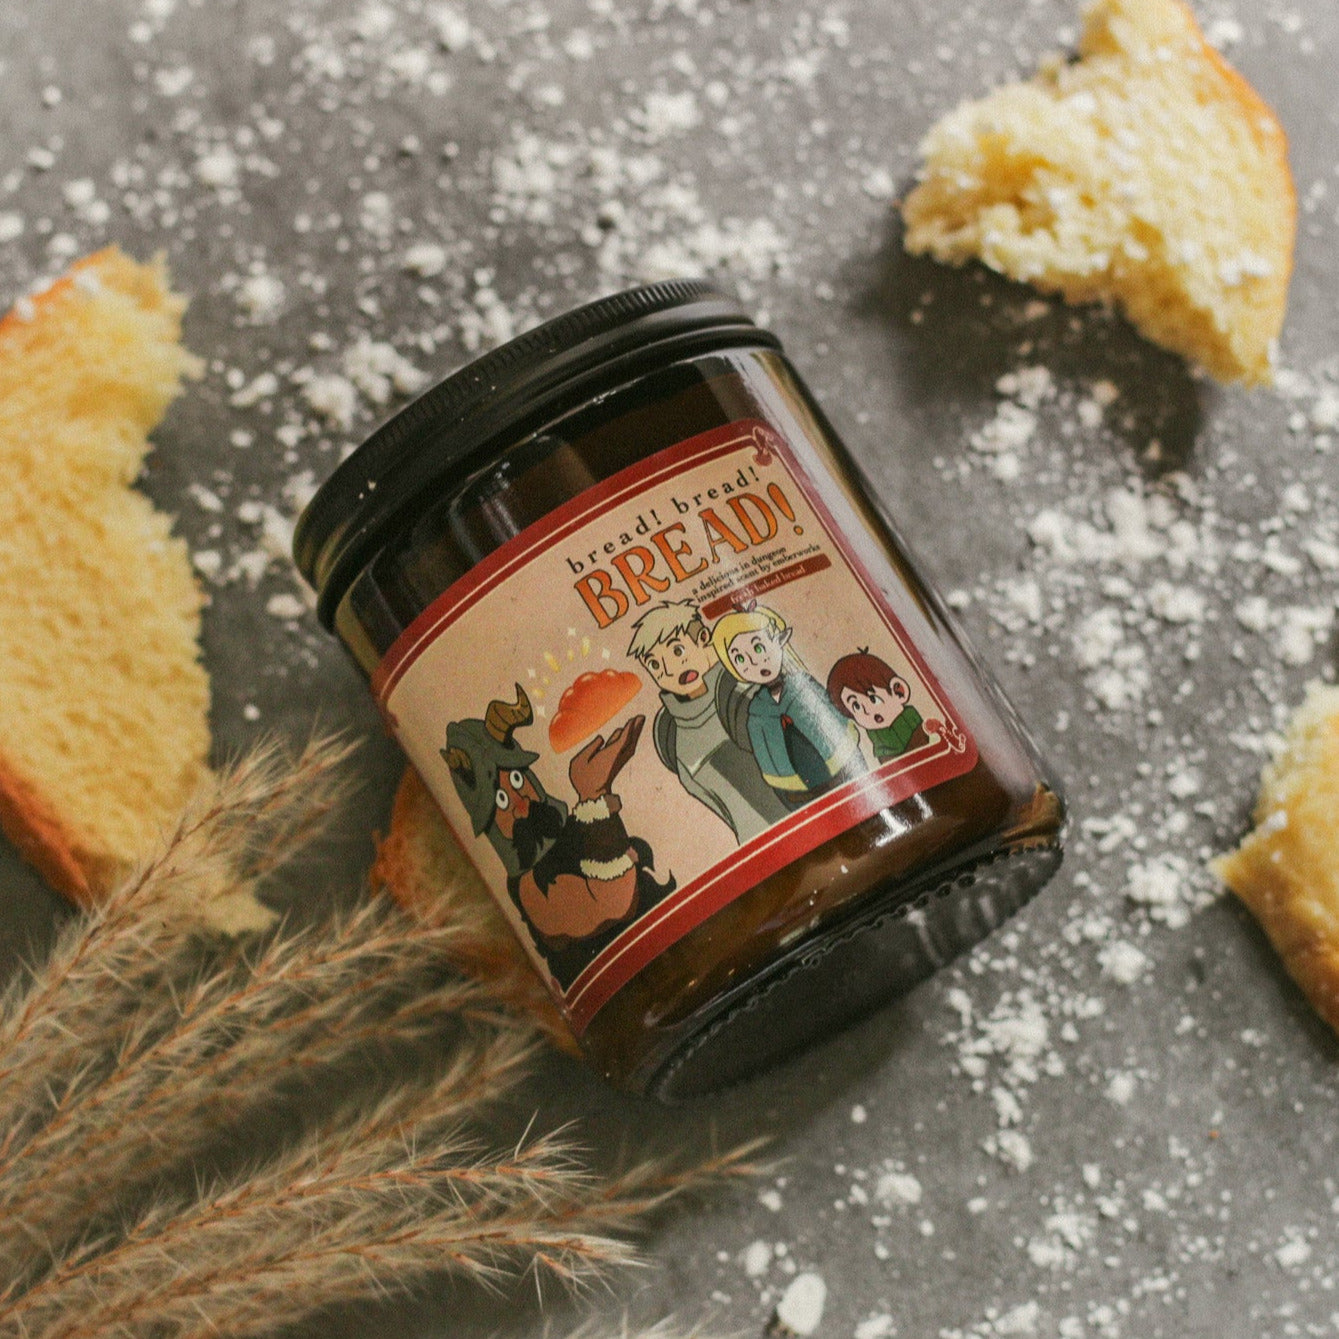 BREAD! - A Delicious in Dungeon Inspired Candle